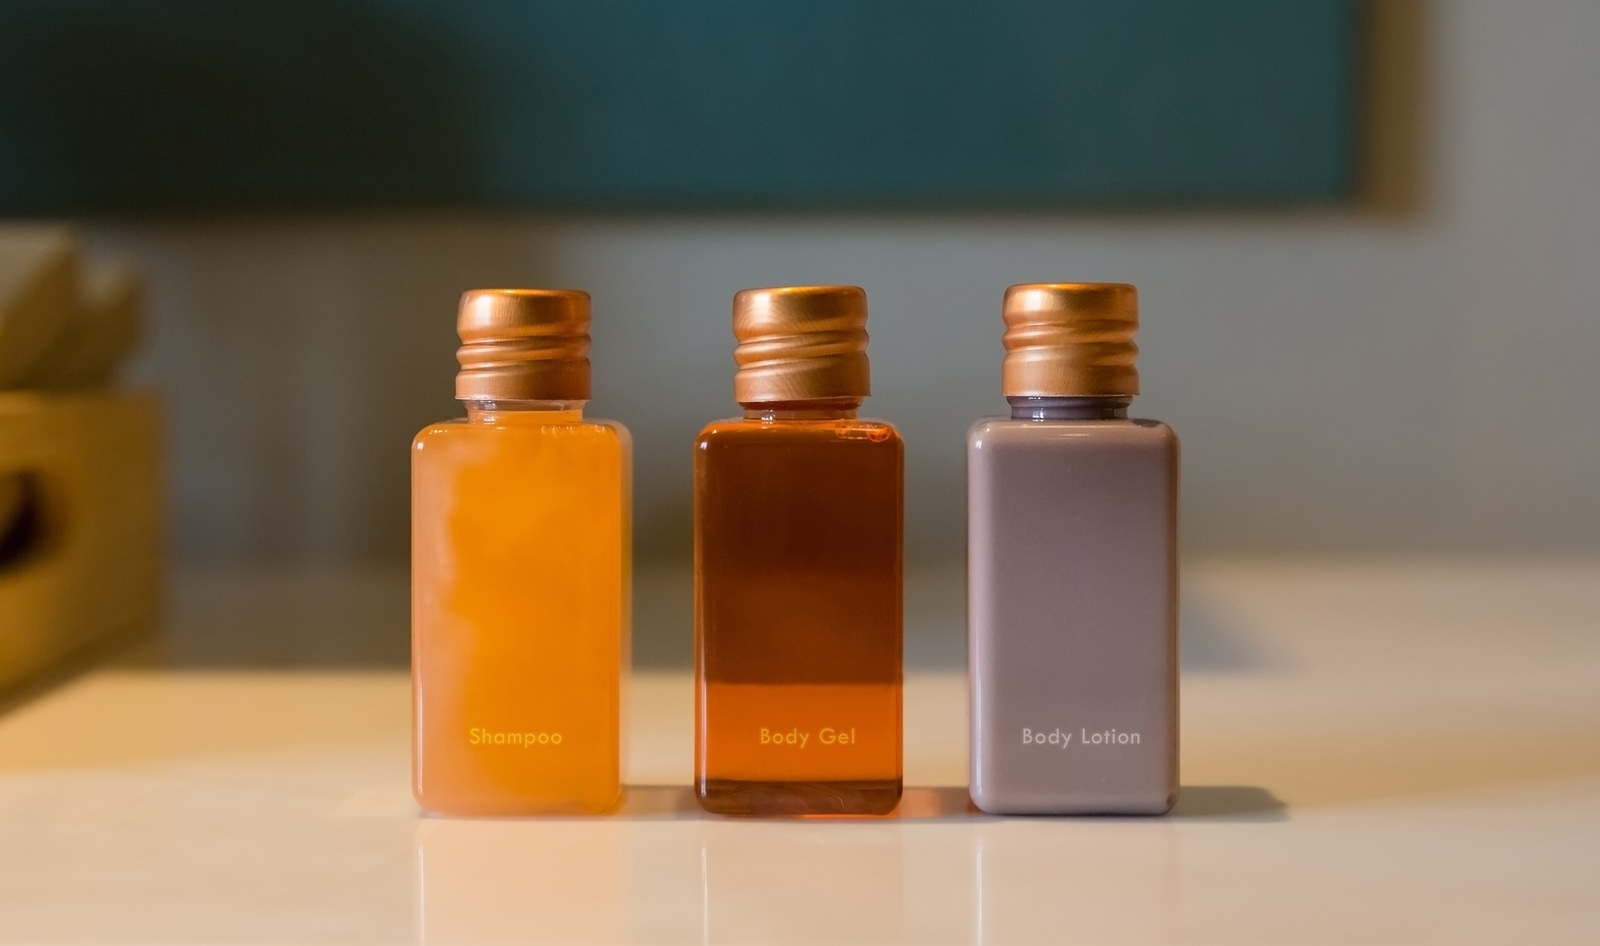 New York Bans Mini Toiletry Bottles from Hotels, Saving Tons of Plastic From the Ocean